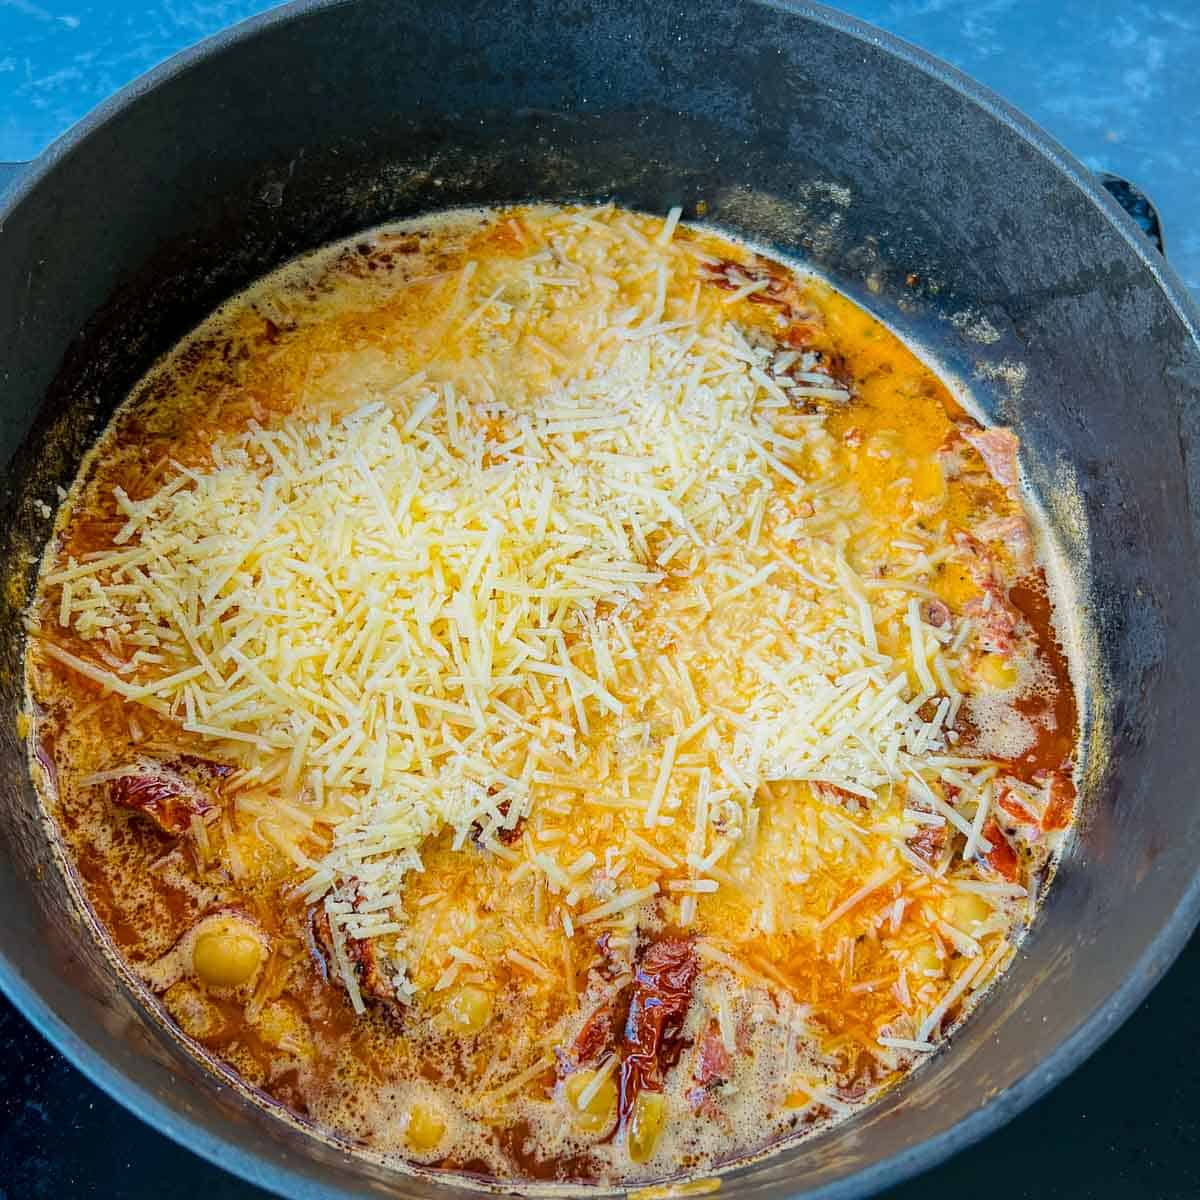 Topped with parmesan cheese.